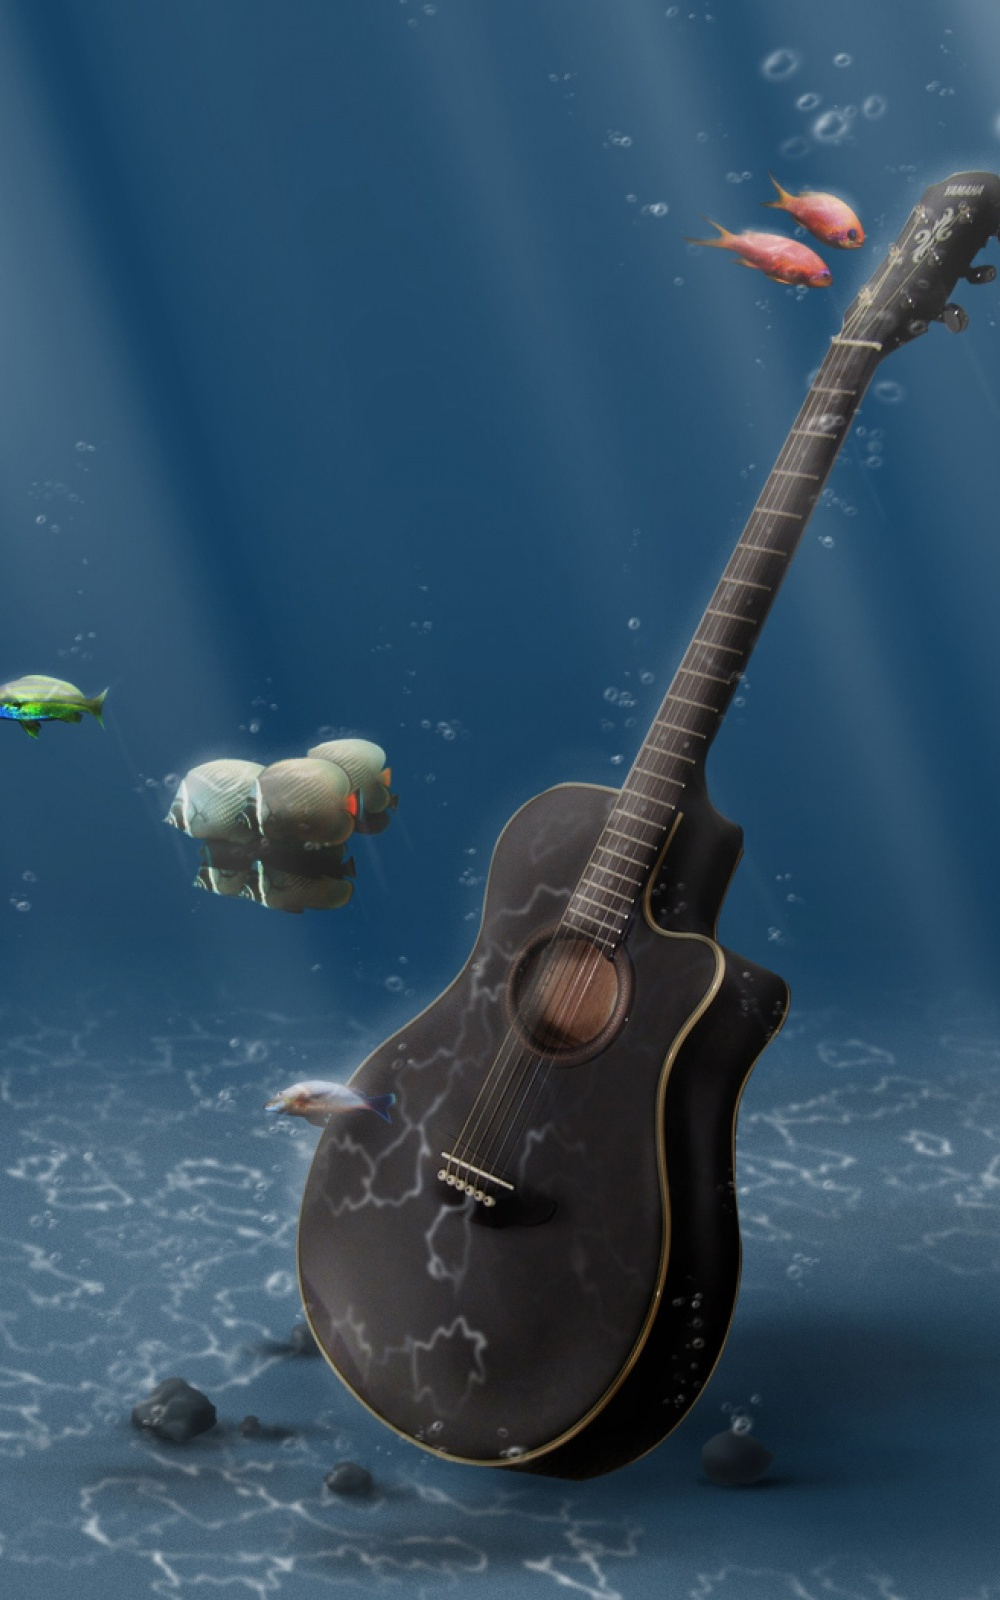 A guitar is in the water with fish - Guitar